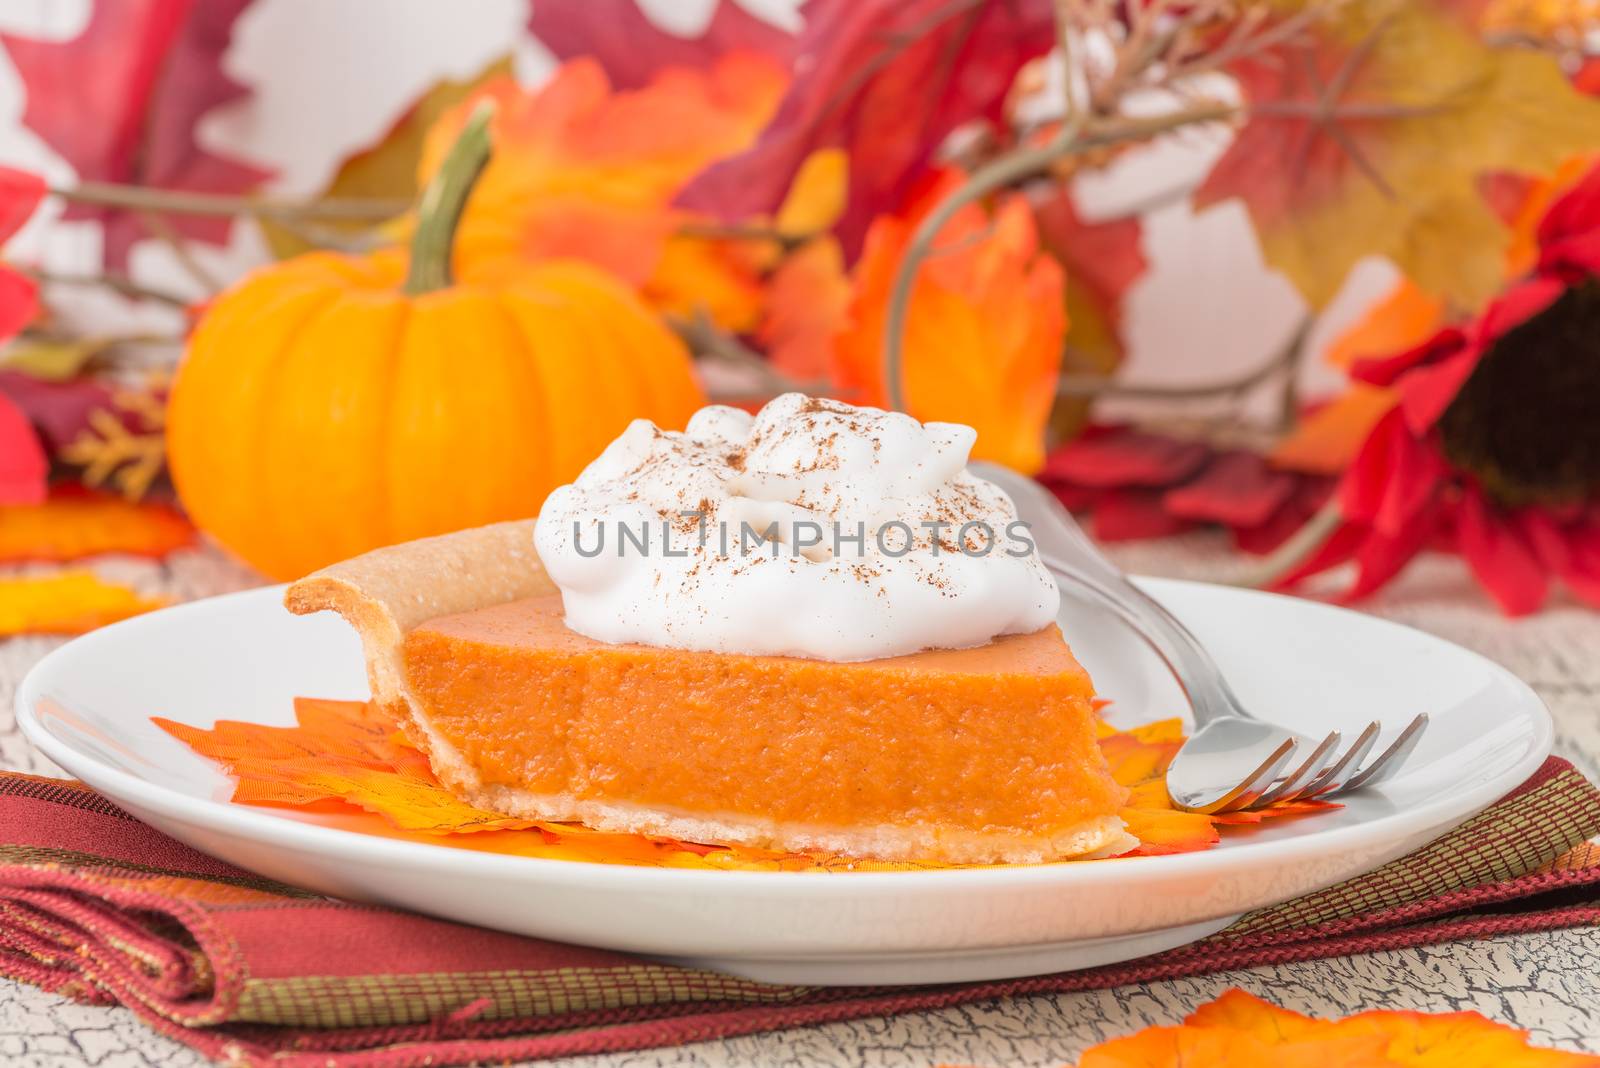 Slice of pumpkin pie plated among beautiful autumn colors.